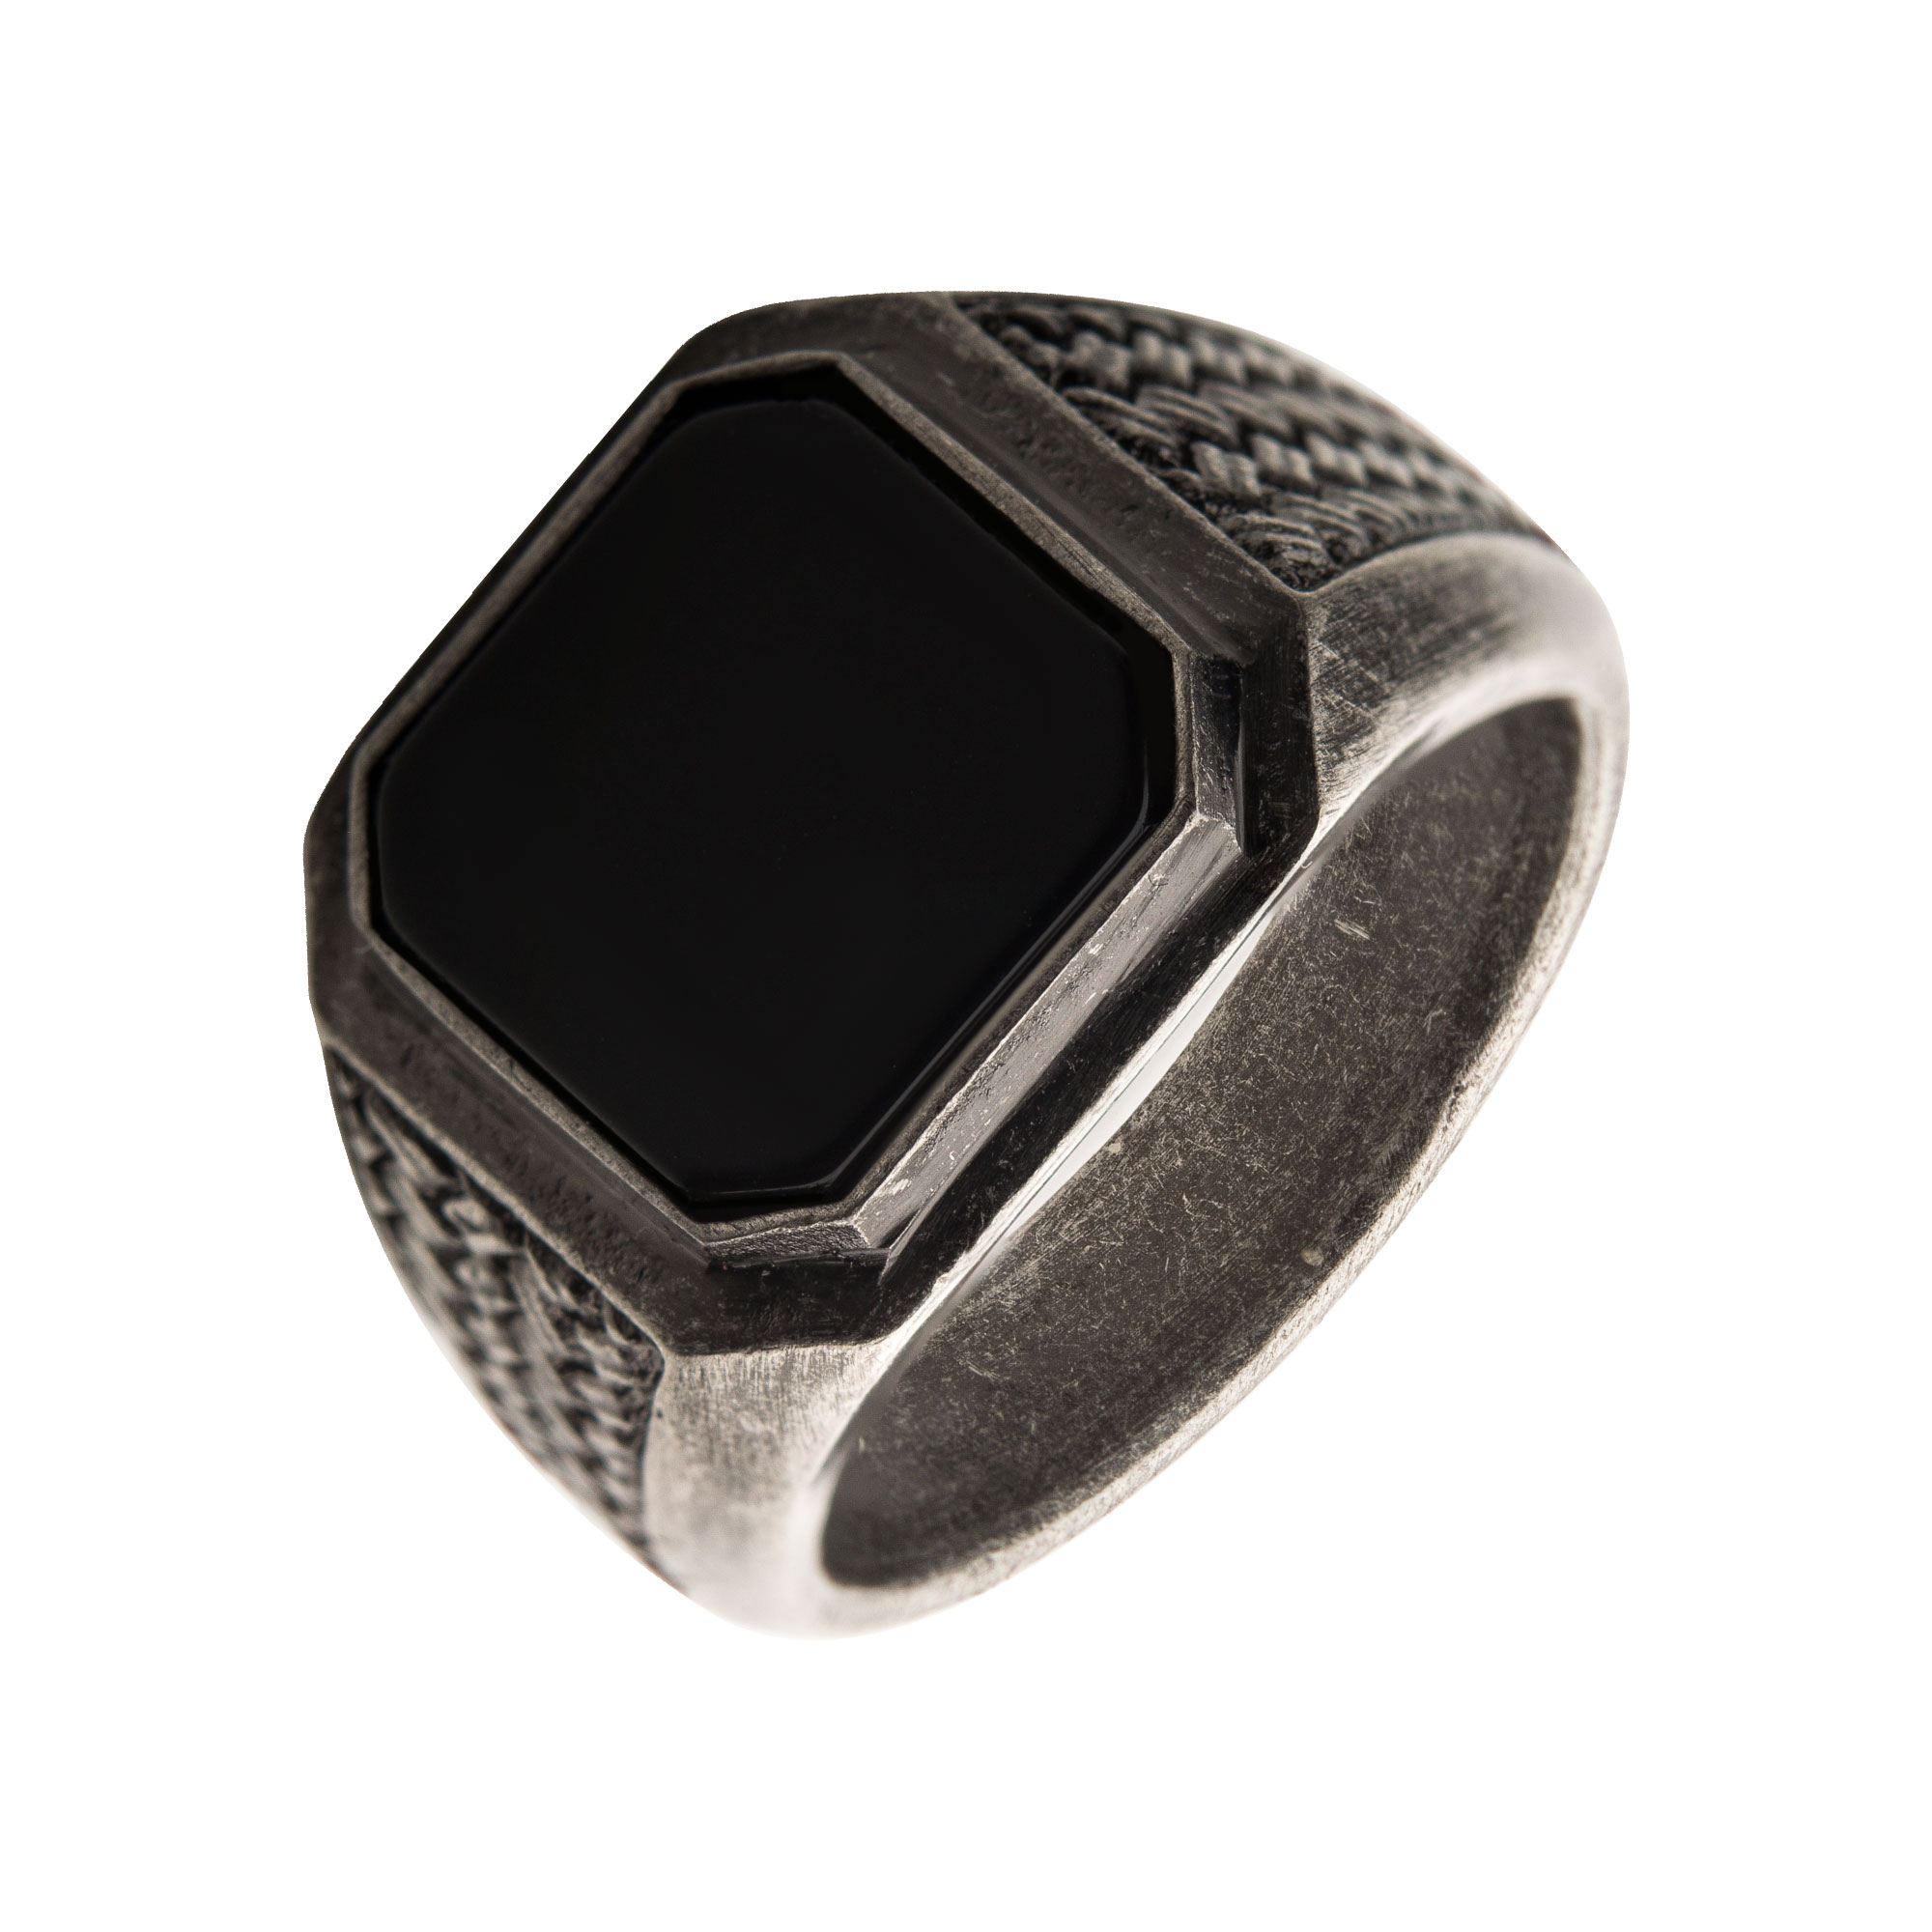 Stainless Steel Silver Plated with Black Agate Stone Ring Carroll / Ochs Jewelers Monroe, MI